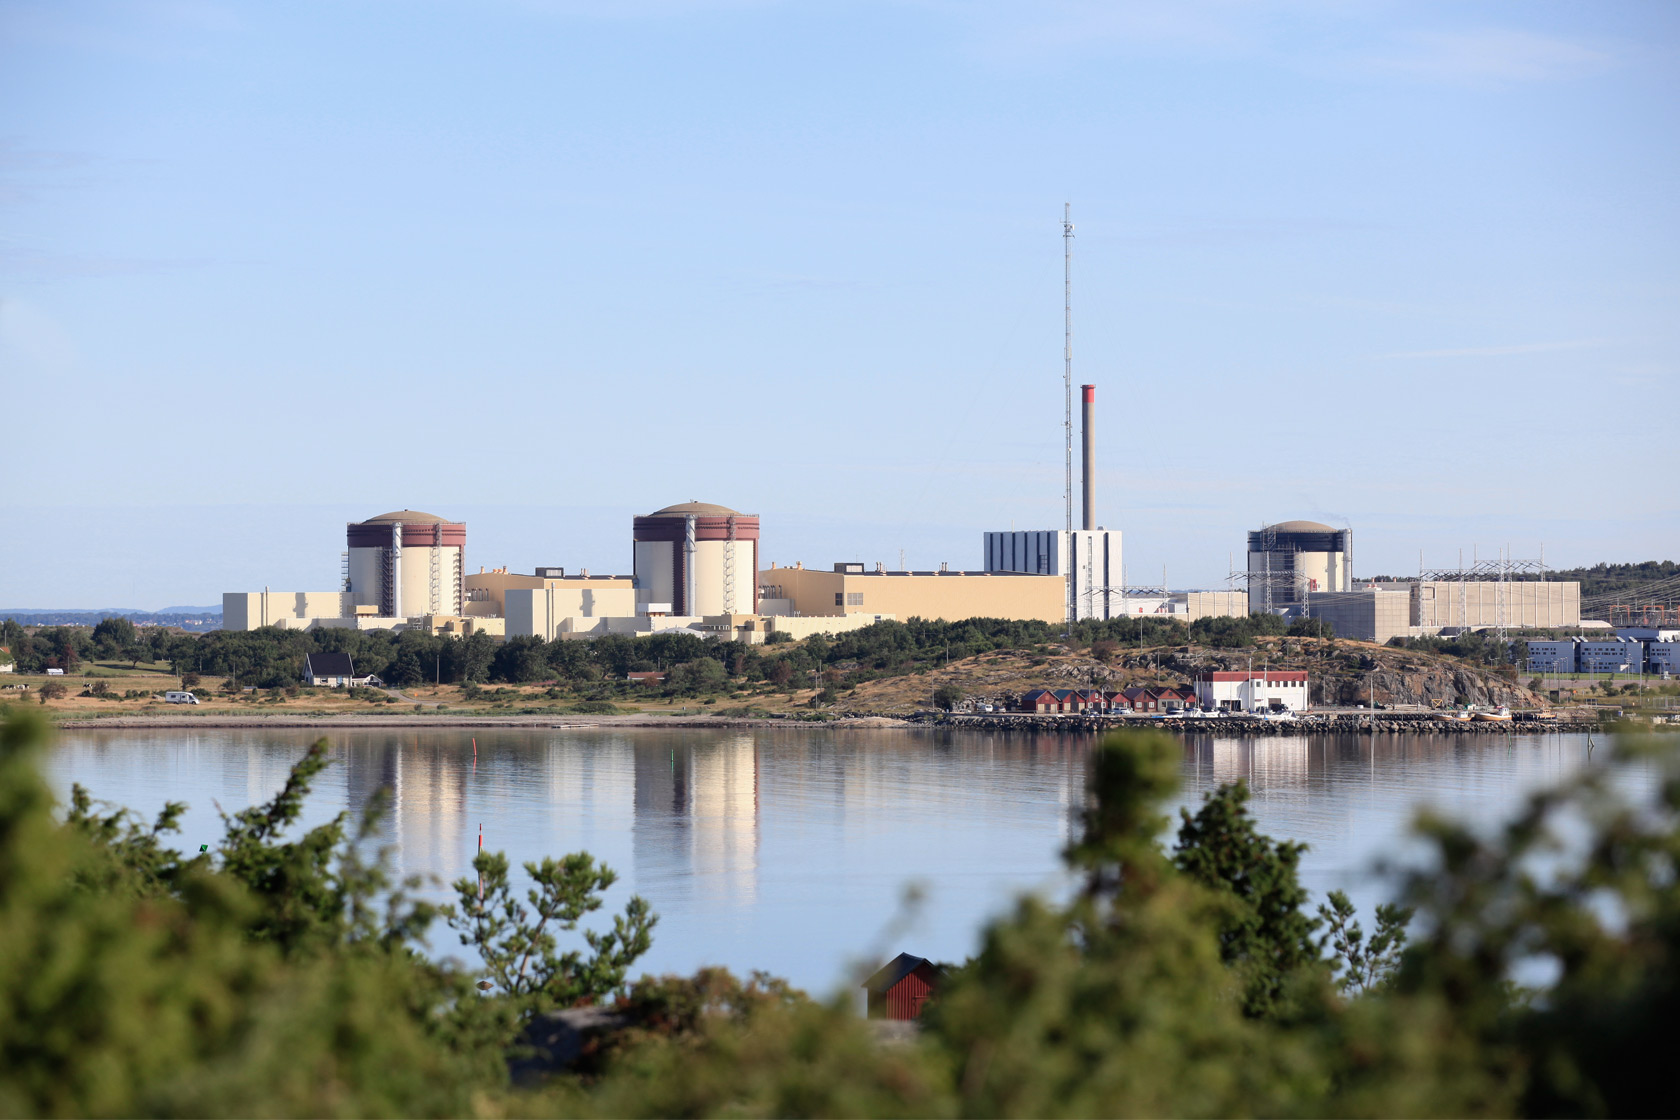 View of Ringhals nuclear power plant